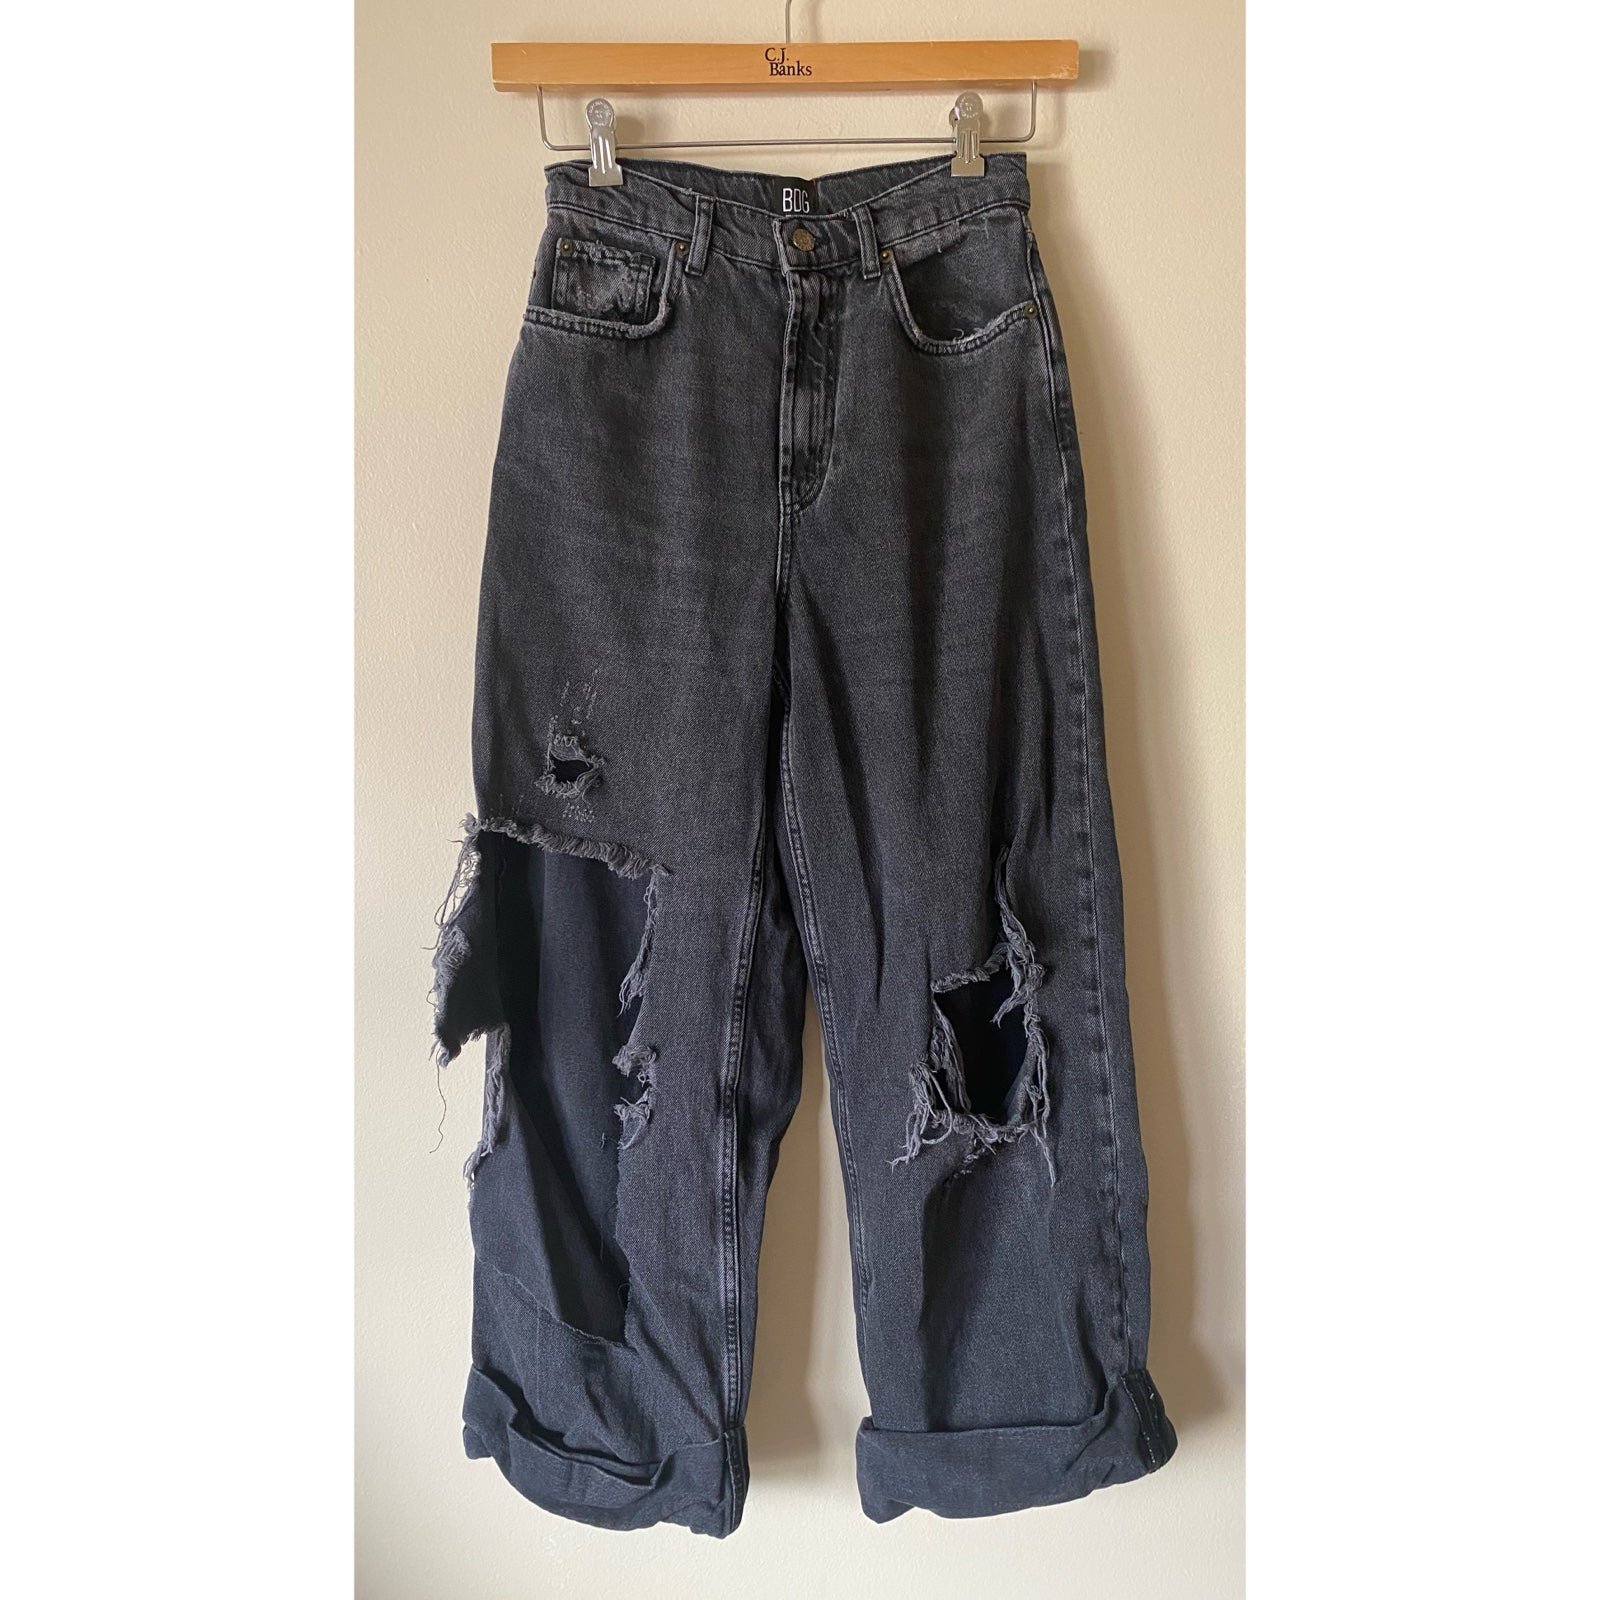 Exclusive Urban Outfitters Washed Black BDG Skater Baggy Jean hi2wEh1as Factory Price